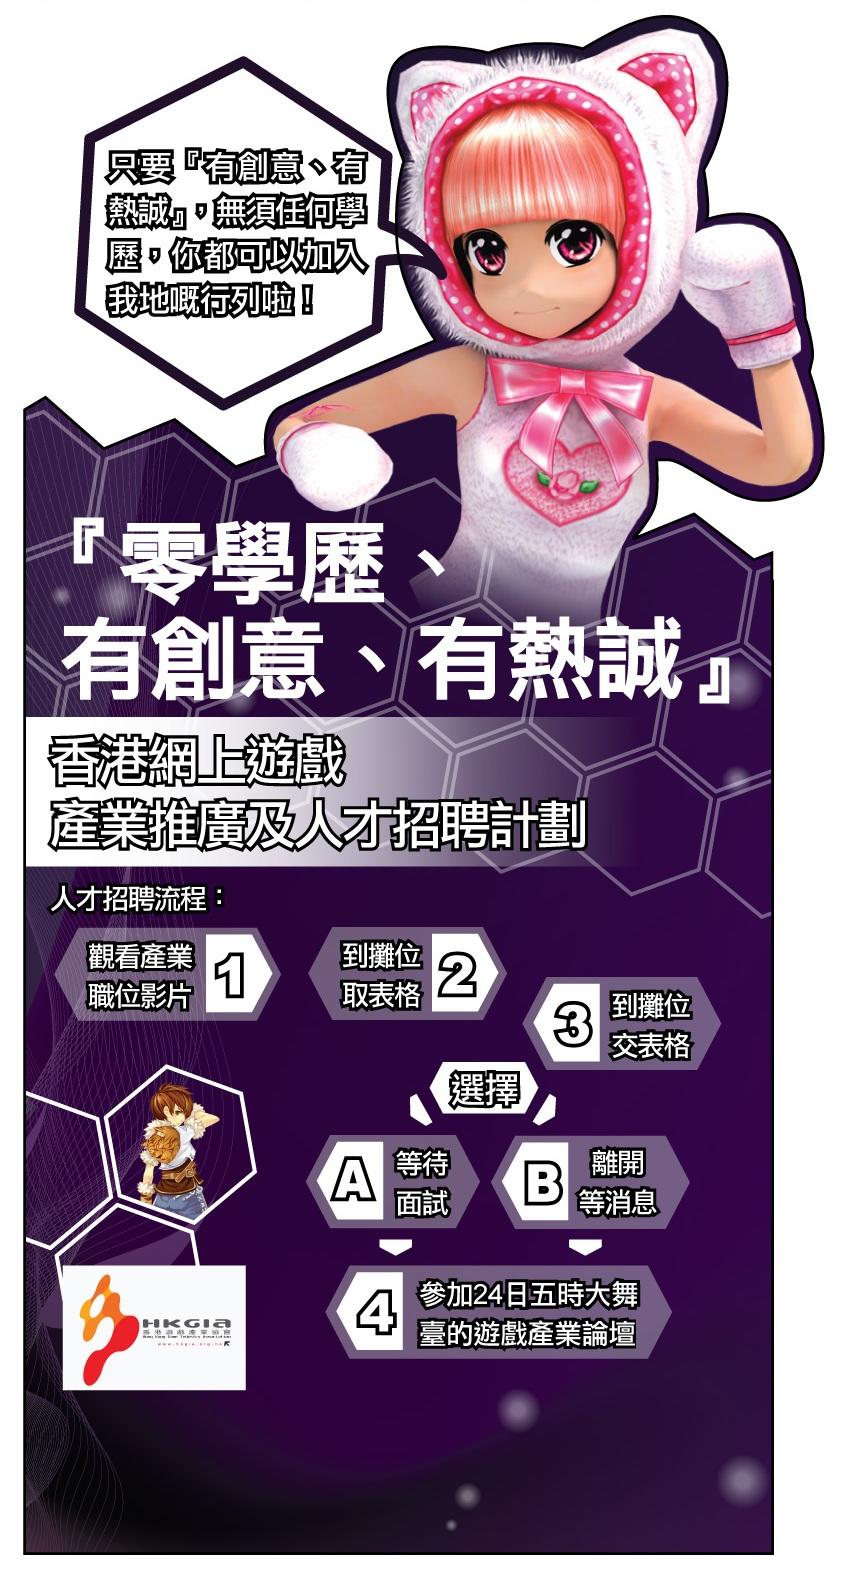 Industry Promotion and Talent Recruitment Campaign for Hong Kong Online Game Industry [COMPLETED]